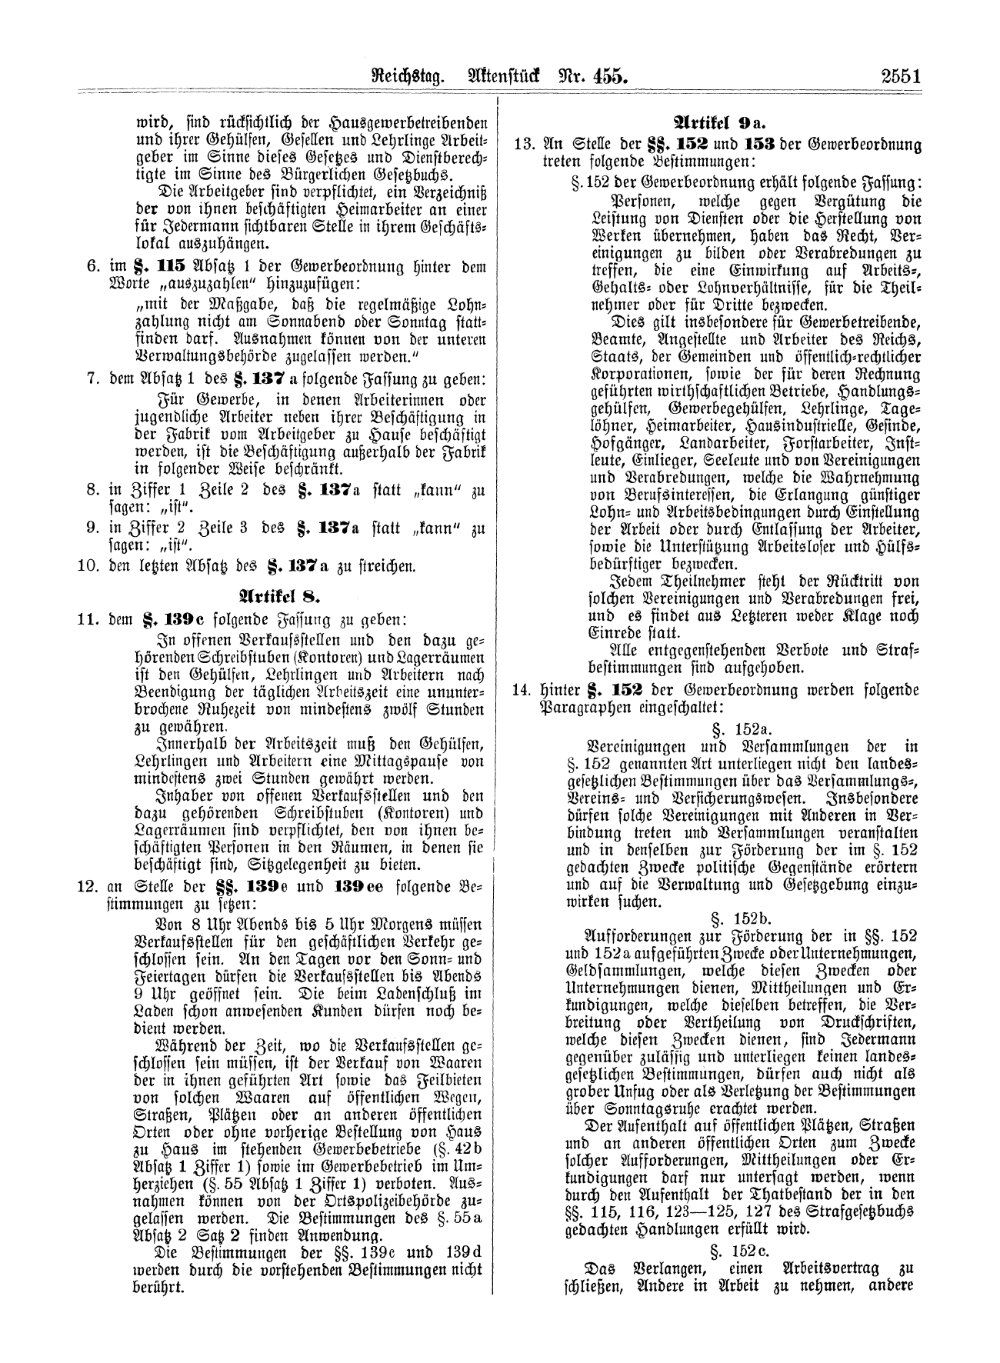 Scan of page 2551